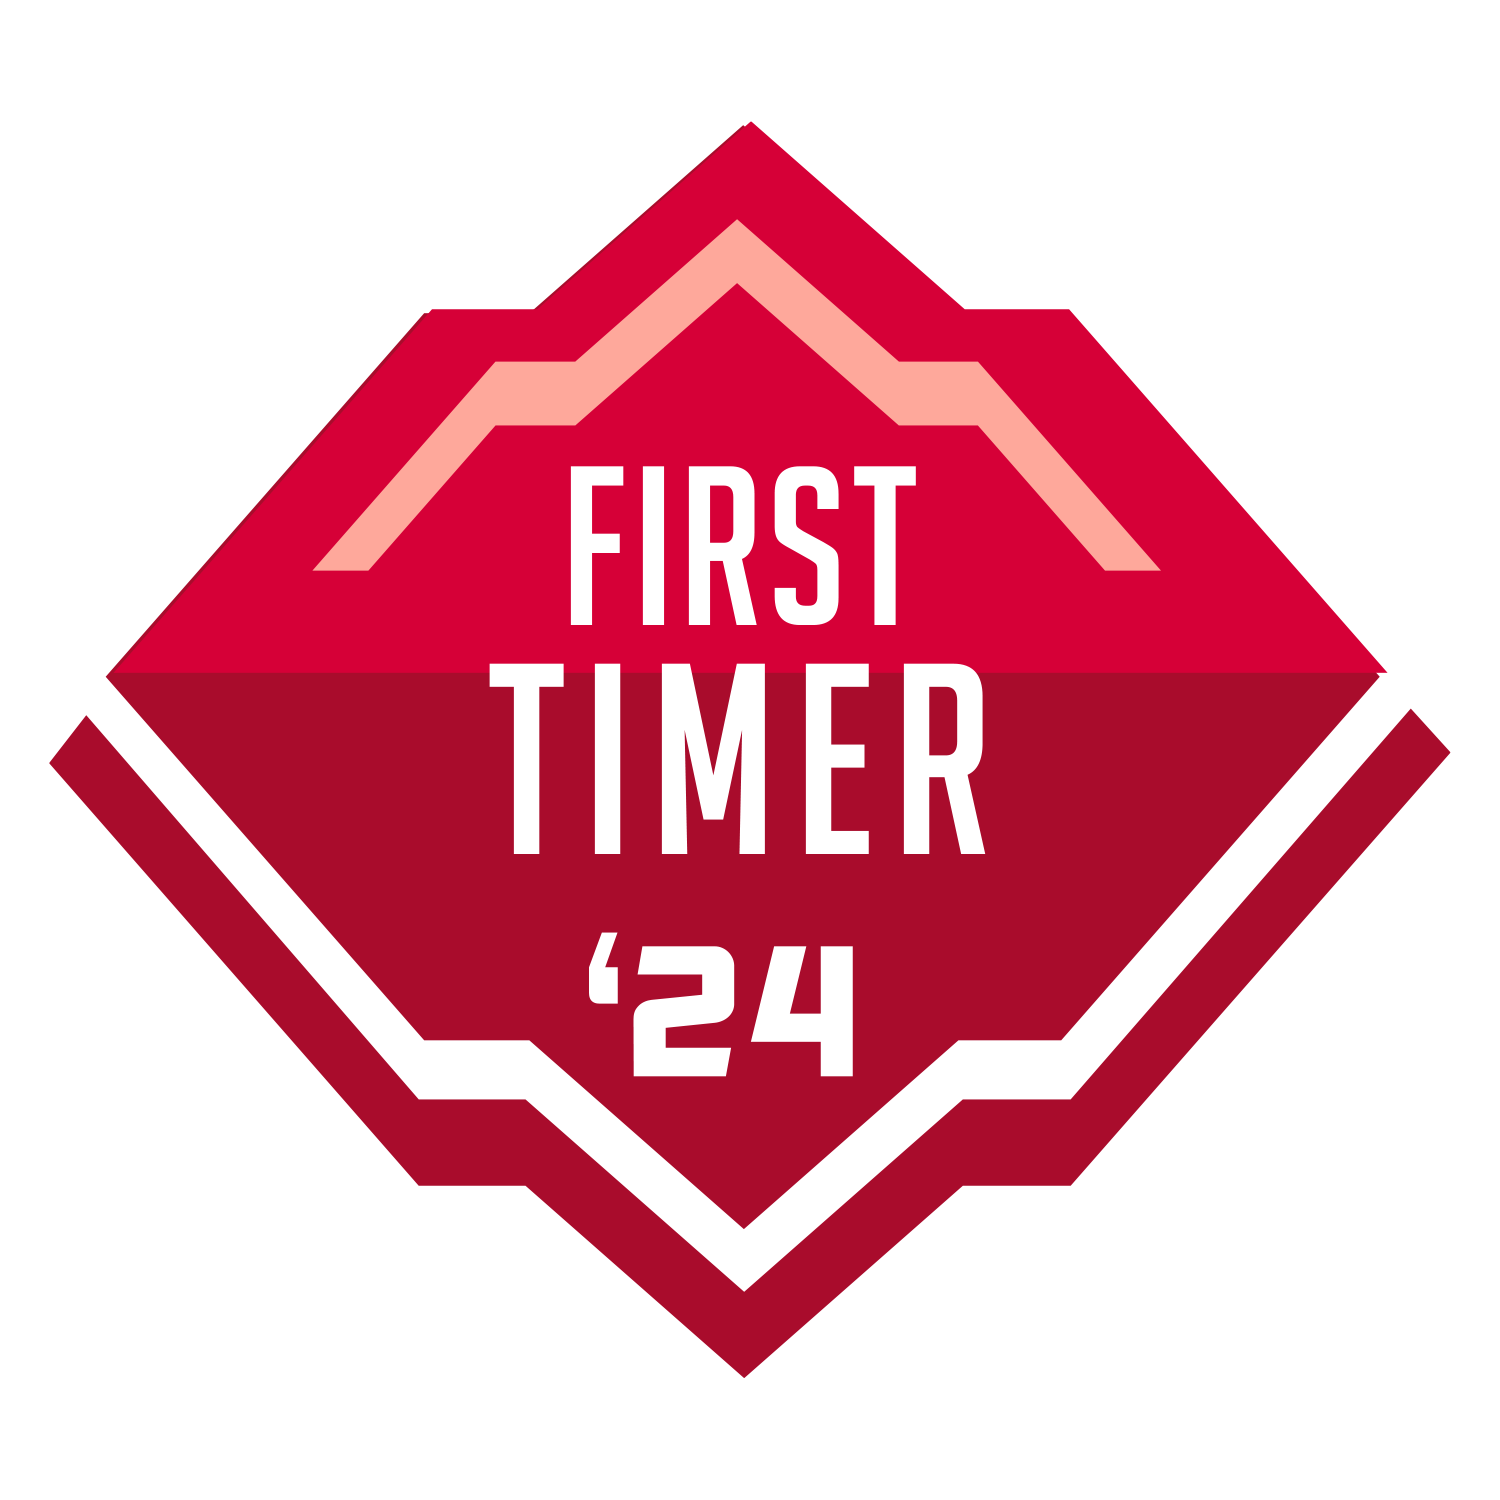 first timer 24 badge